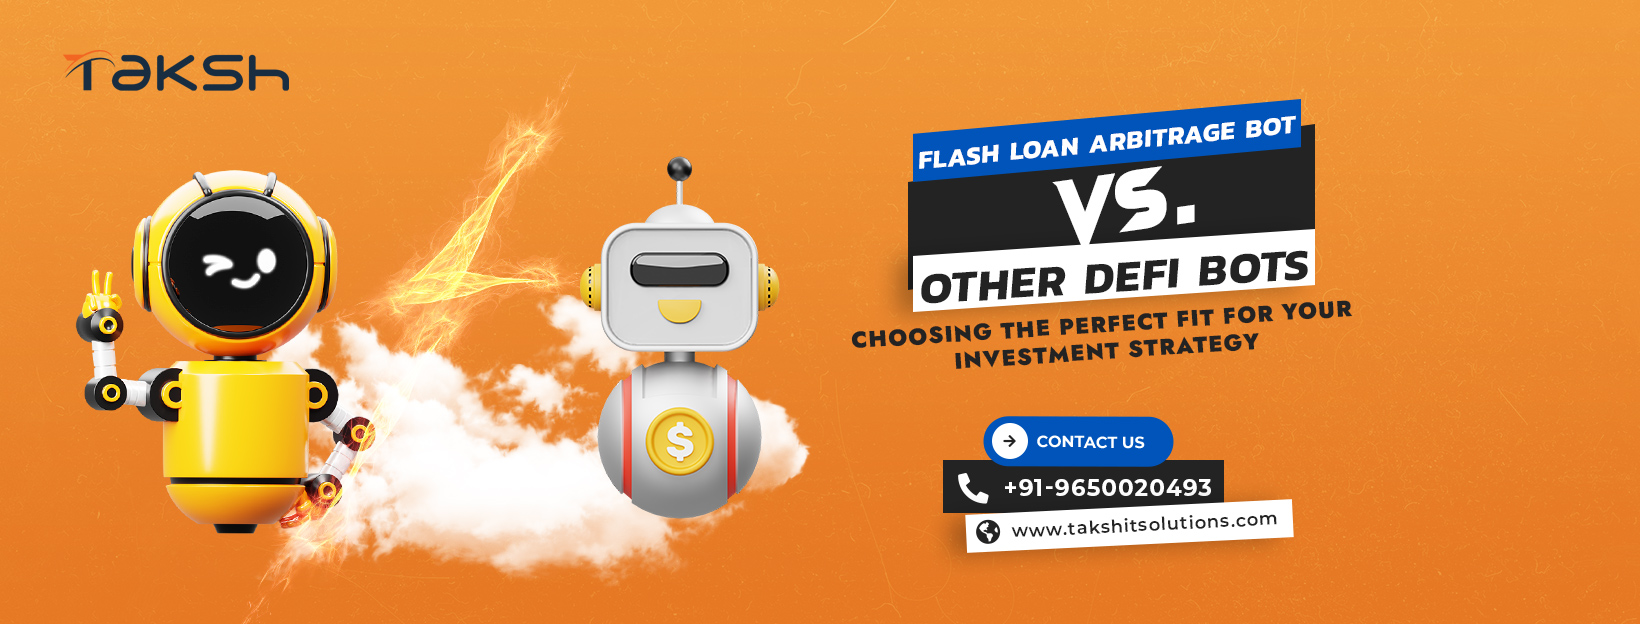 Flash Loan Arbitrage Bot vs. Other DeFi Bots: Choosing the Perfect Fit for Your Investment Strategy